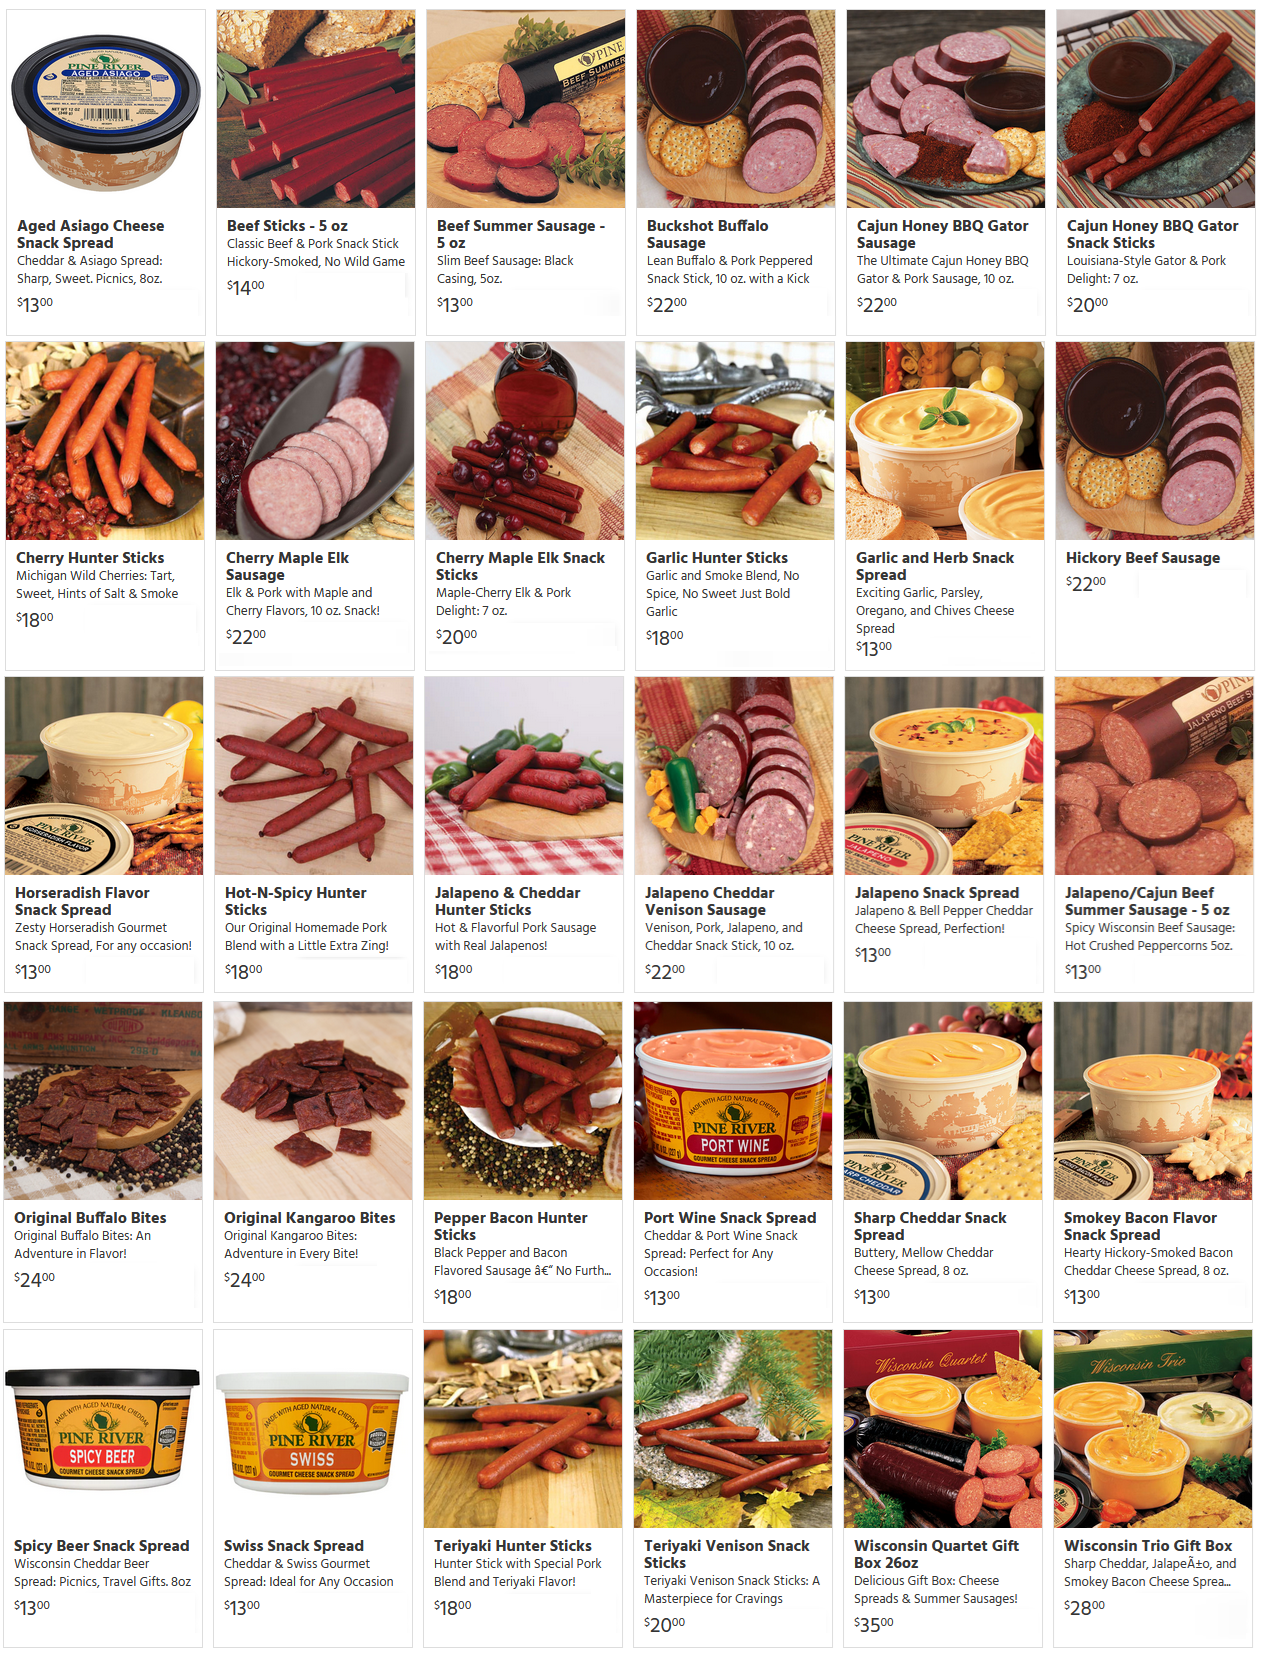 Cheese & Sausage Online Store Products